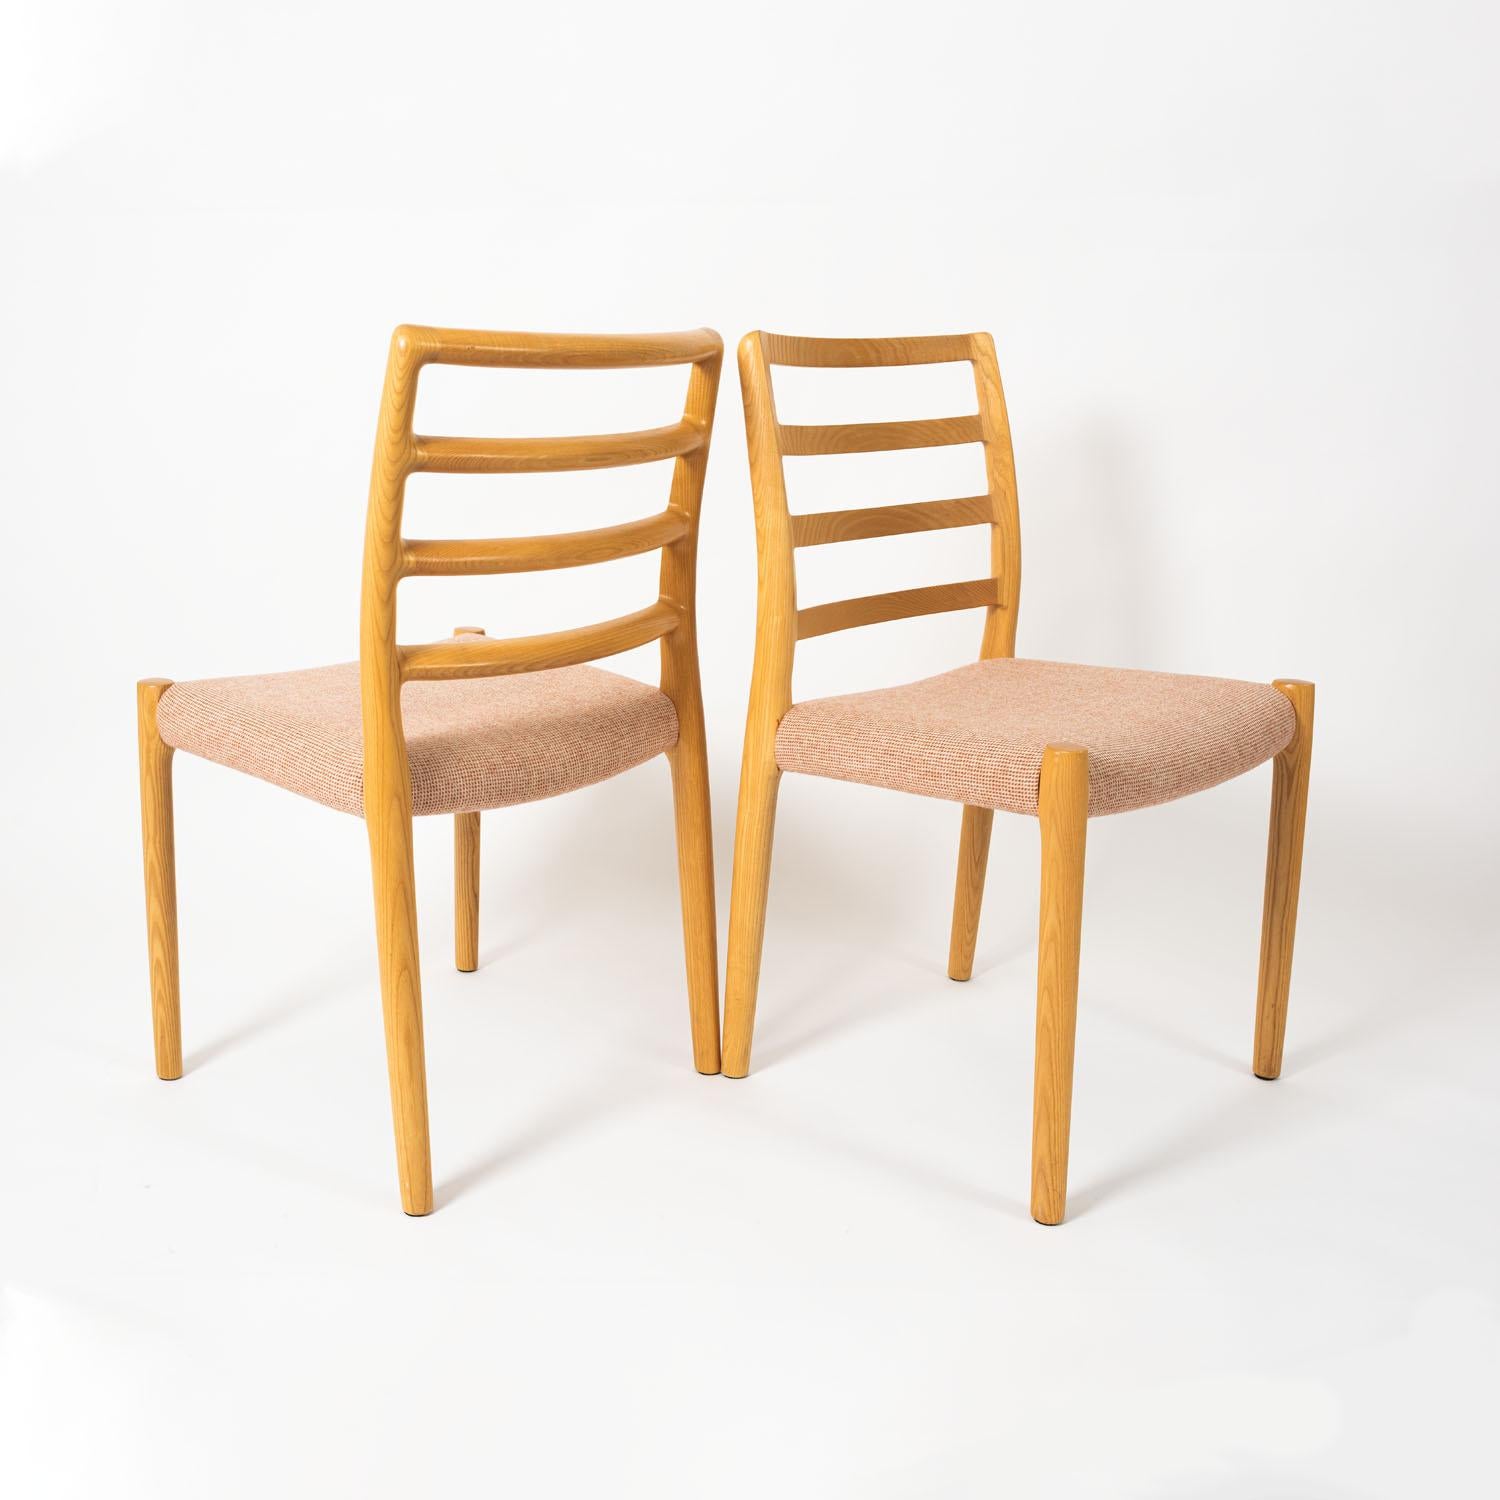 The Møller 85 chair was designed in 1981 by Niels Otto Møller. Since 1944, J. L. Møller has produced chairs of outstanding quality and timeless design. The Møller 85 chair utilizes mortise and tenon joints, strengthening the construction. Every